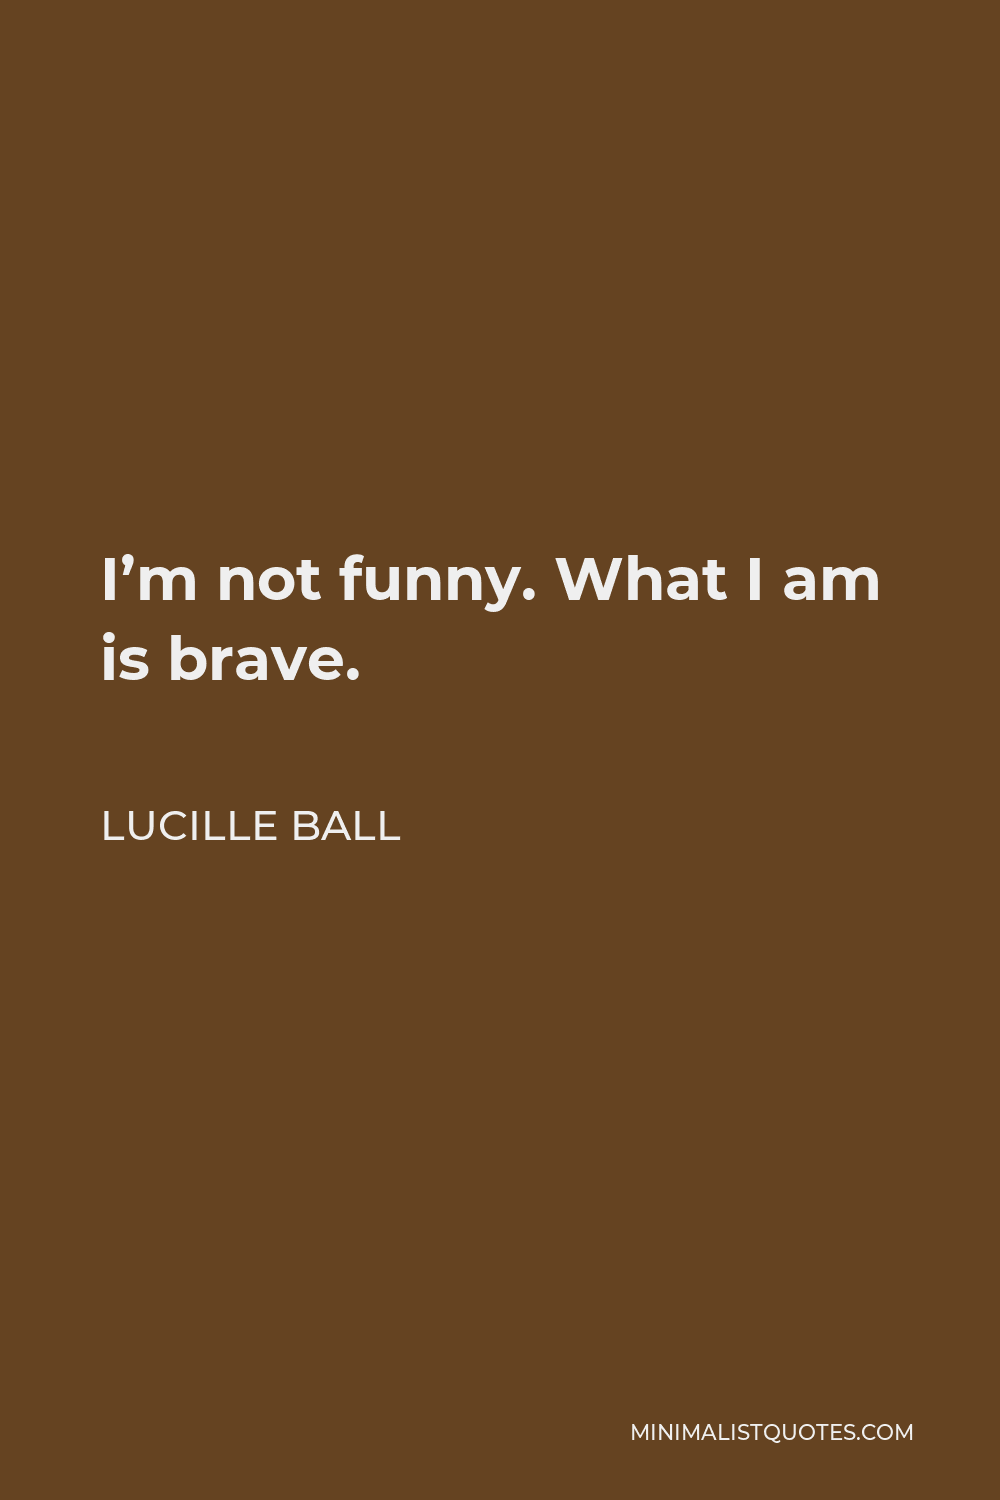 Lucille Ball Quote - I’m not funny. What I am is brave.